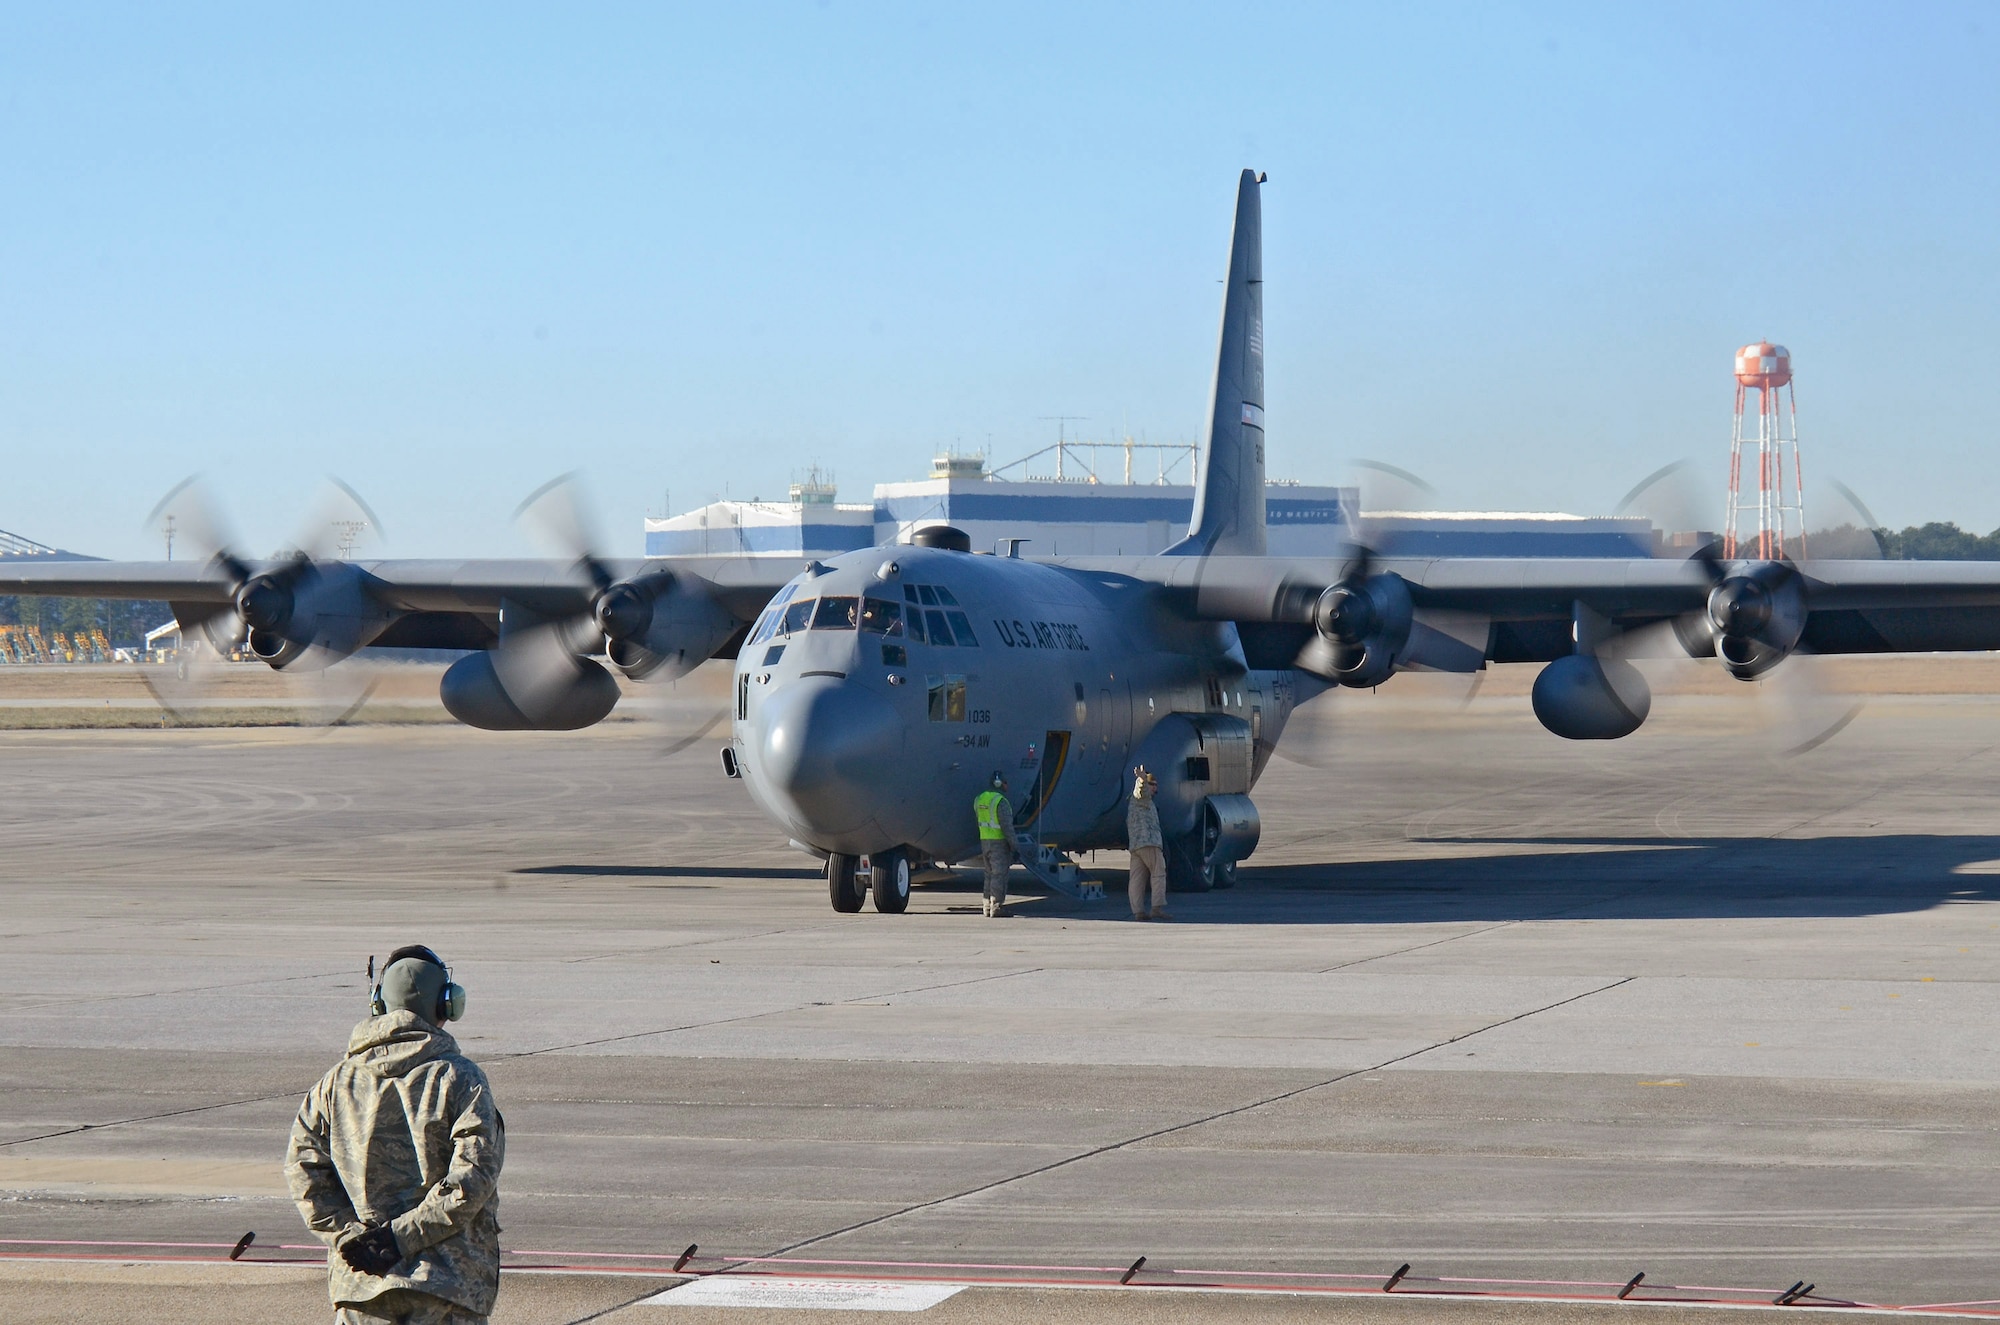 The 700th Airlift Squadron loadmaster prepares to board the 94th Airlift Wing C-130H3 after all engines are running at Dobbins Air Reserve Base, Ga., Jan. 8, 2015. The aircraft and crew are leaving for deployment to Southwest Asia.  (U.S. Air Force photo/Brad Fallin)